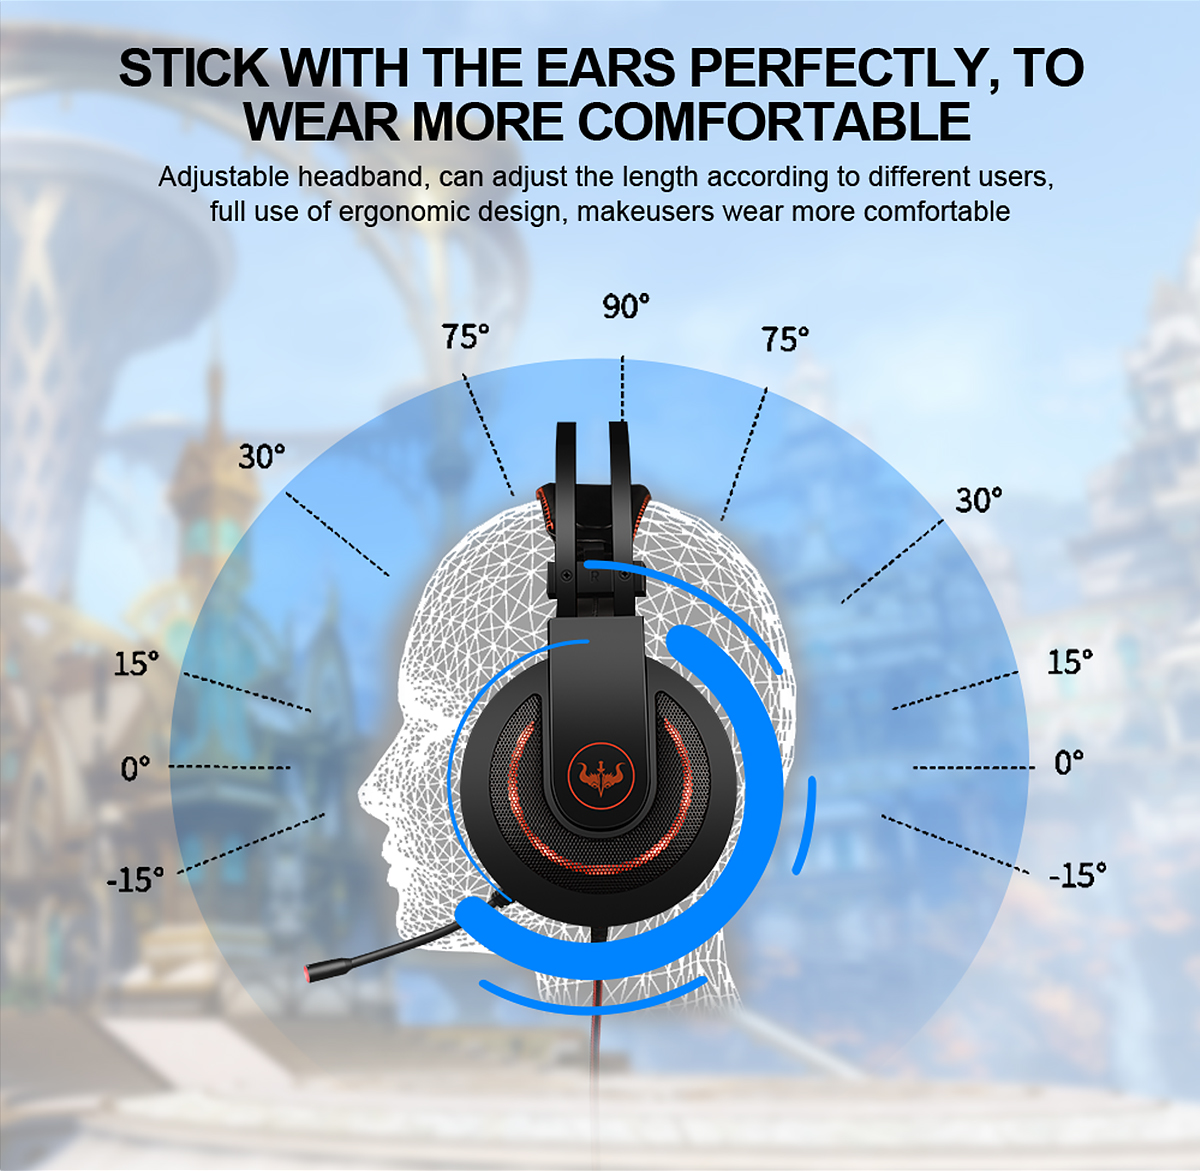 OVLENG-GT65-E-sport-Gaming-Headset-Wired-35mm-Jack-50mm-Bass-Stereo-Sound-LED-Light-Headphone-with-M-1817461-4